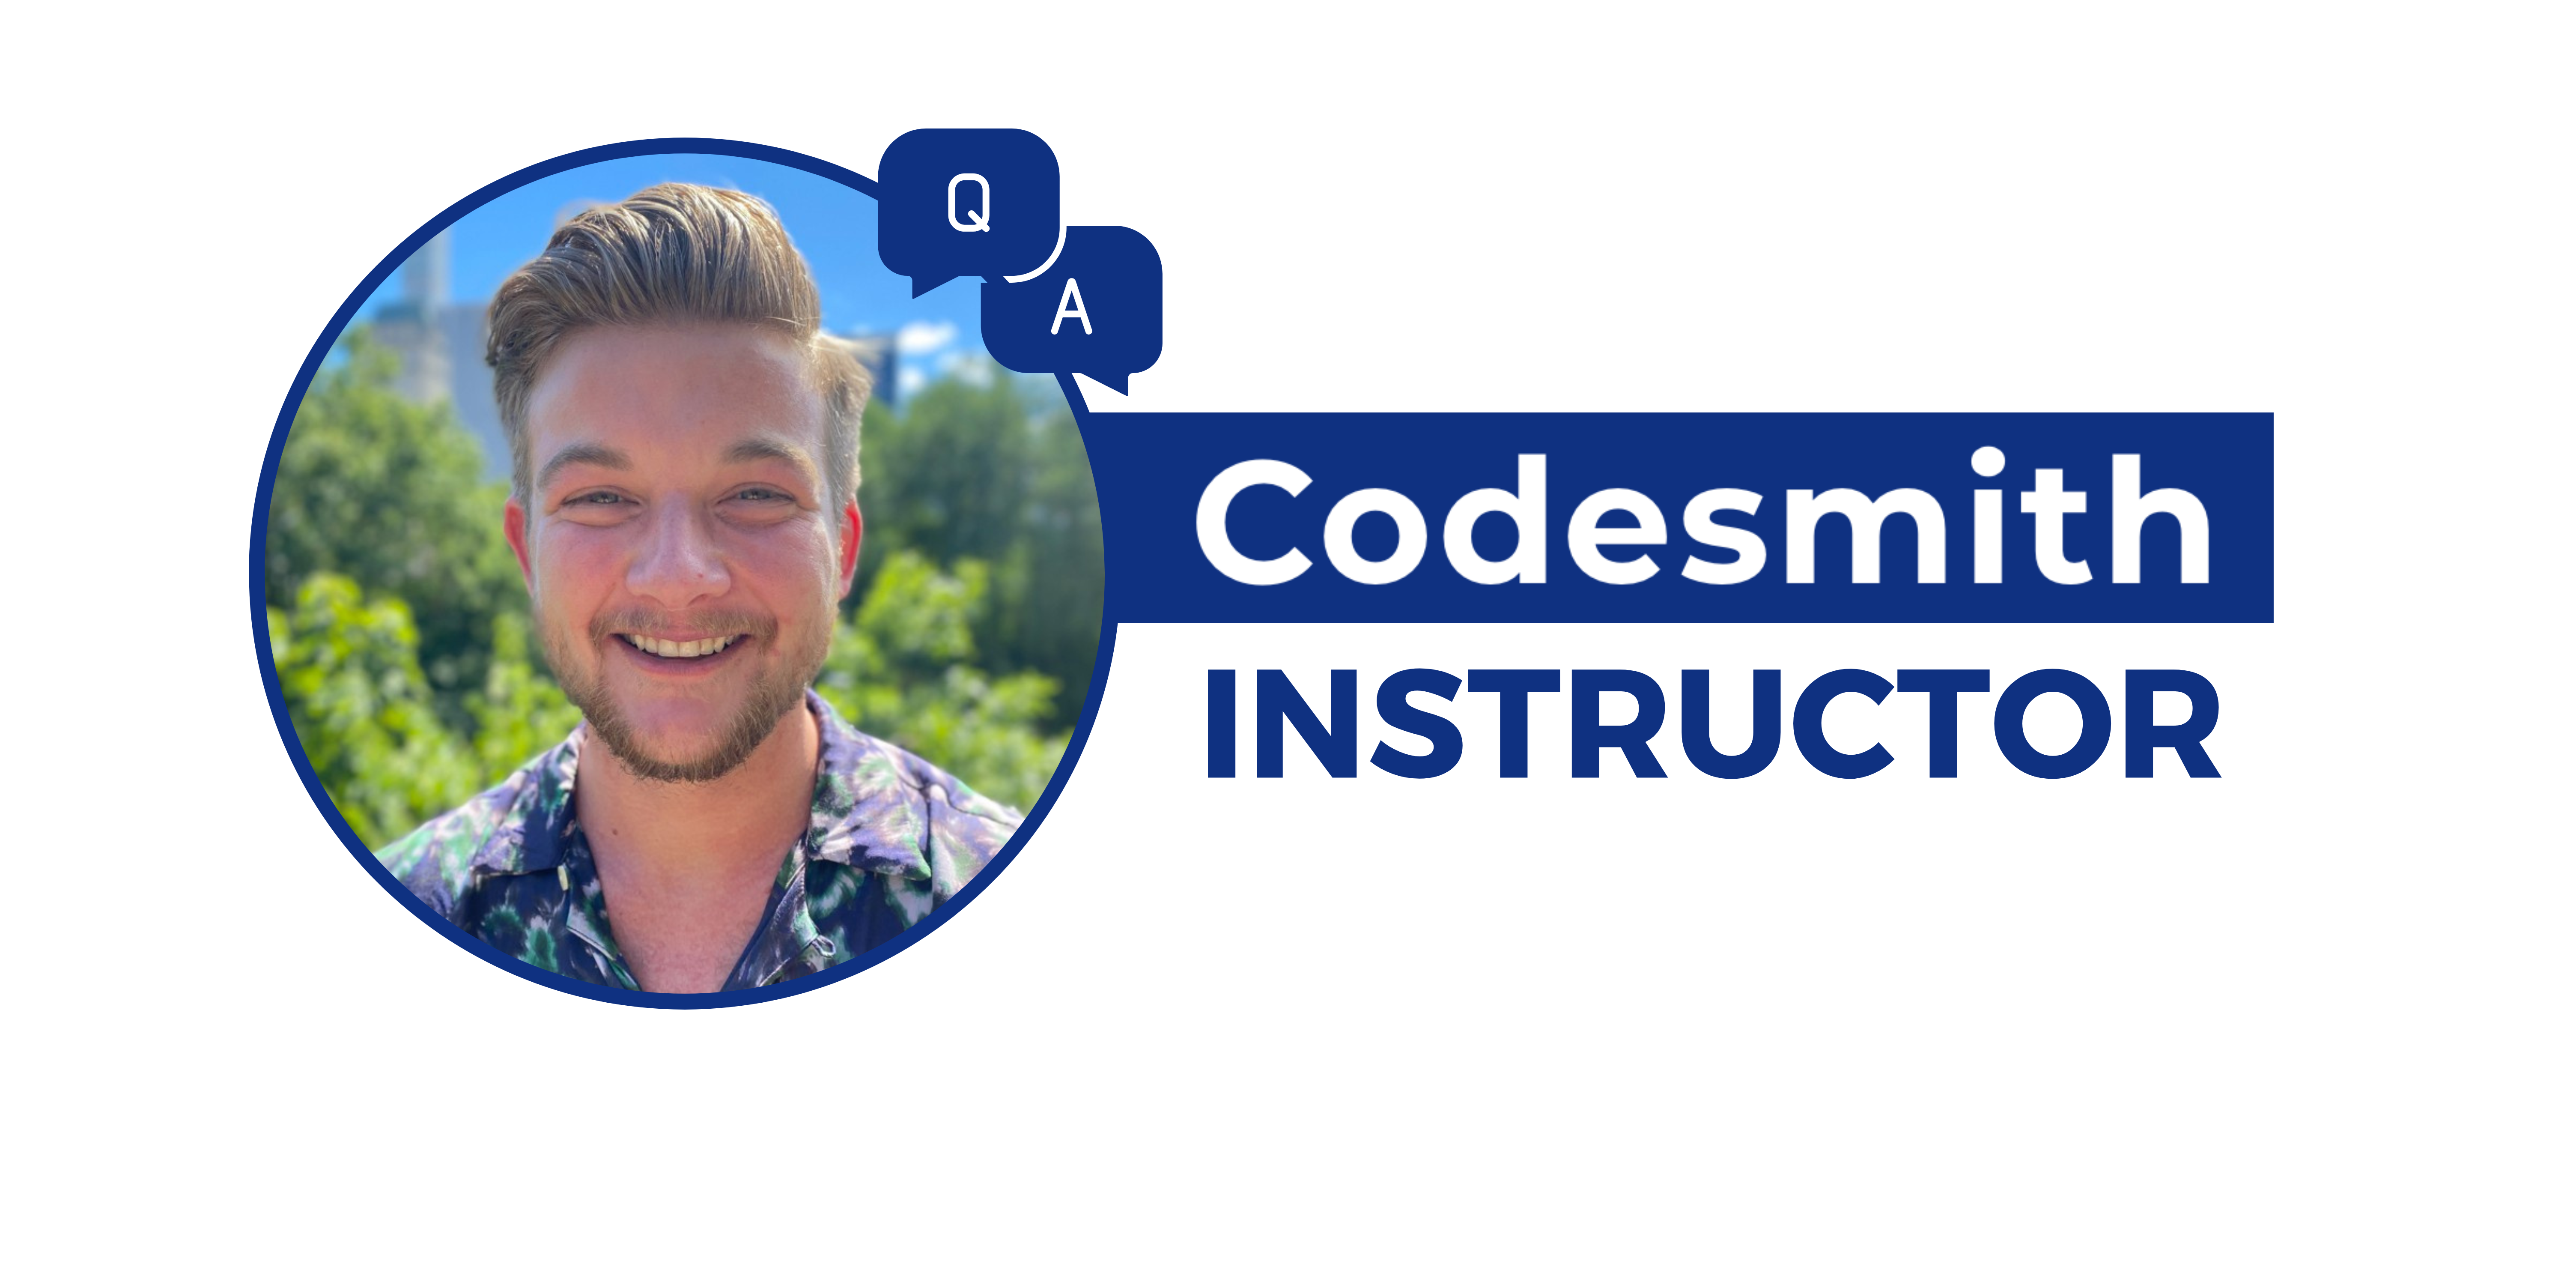 Photo of Codesmith Instructor Ryan with text that reads Codesmith Instructor Q&A